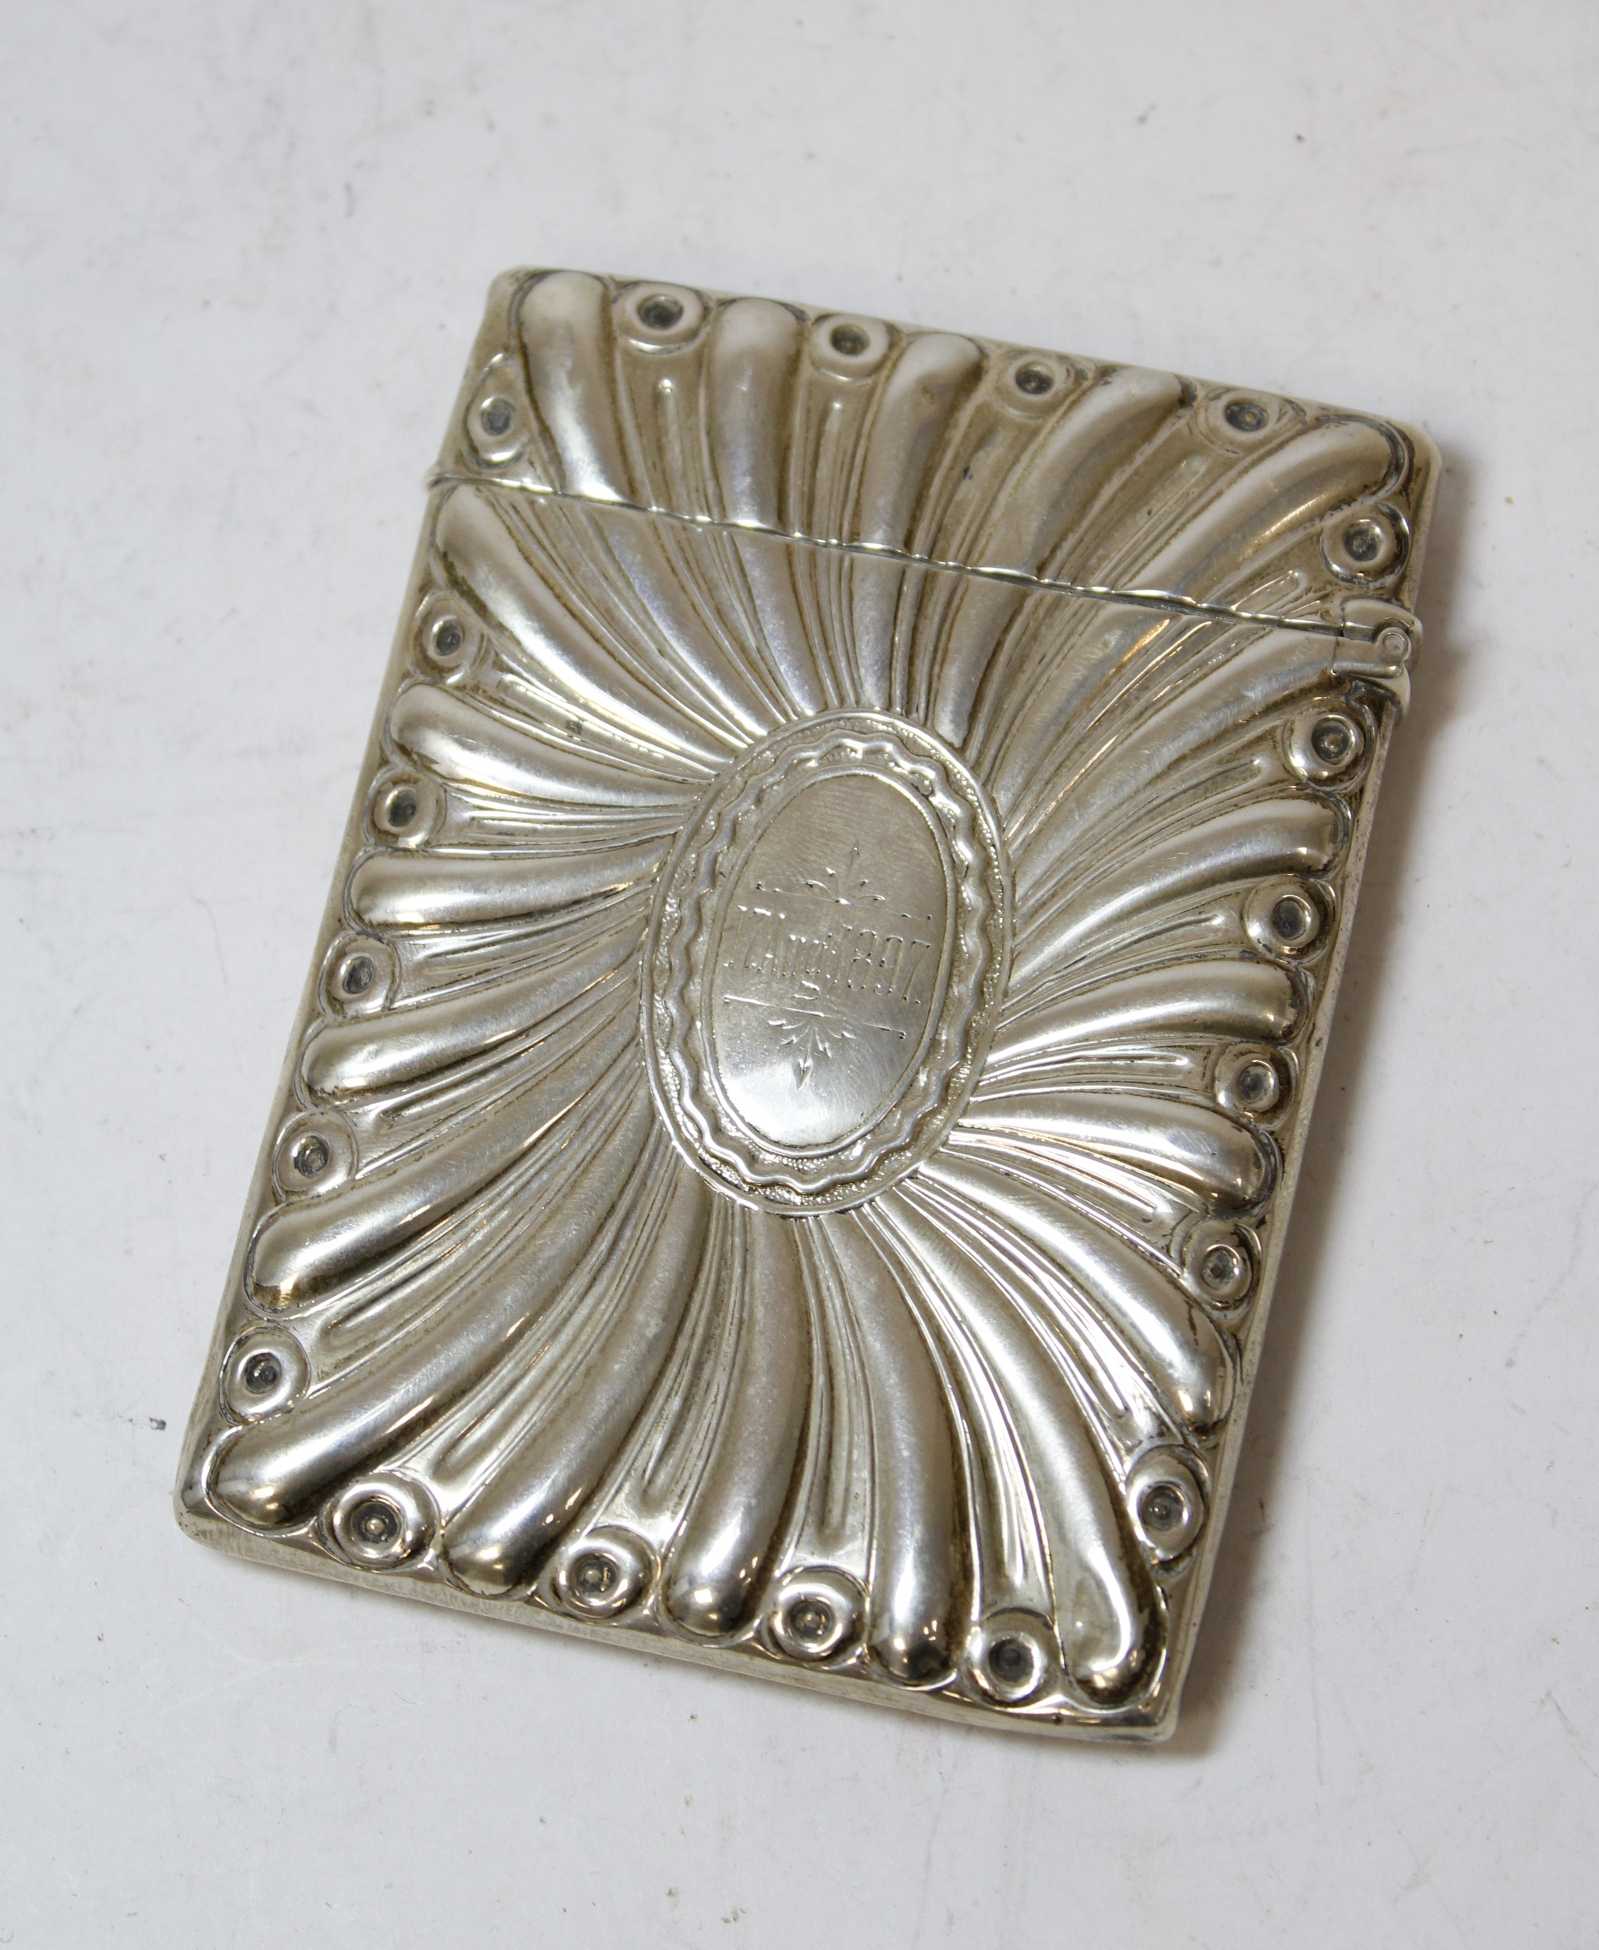 Silver card case with radiating embossing by W. Comyns 1899, 138g. - Image 2 of 7